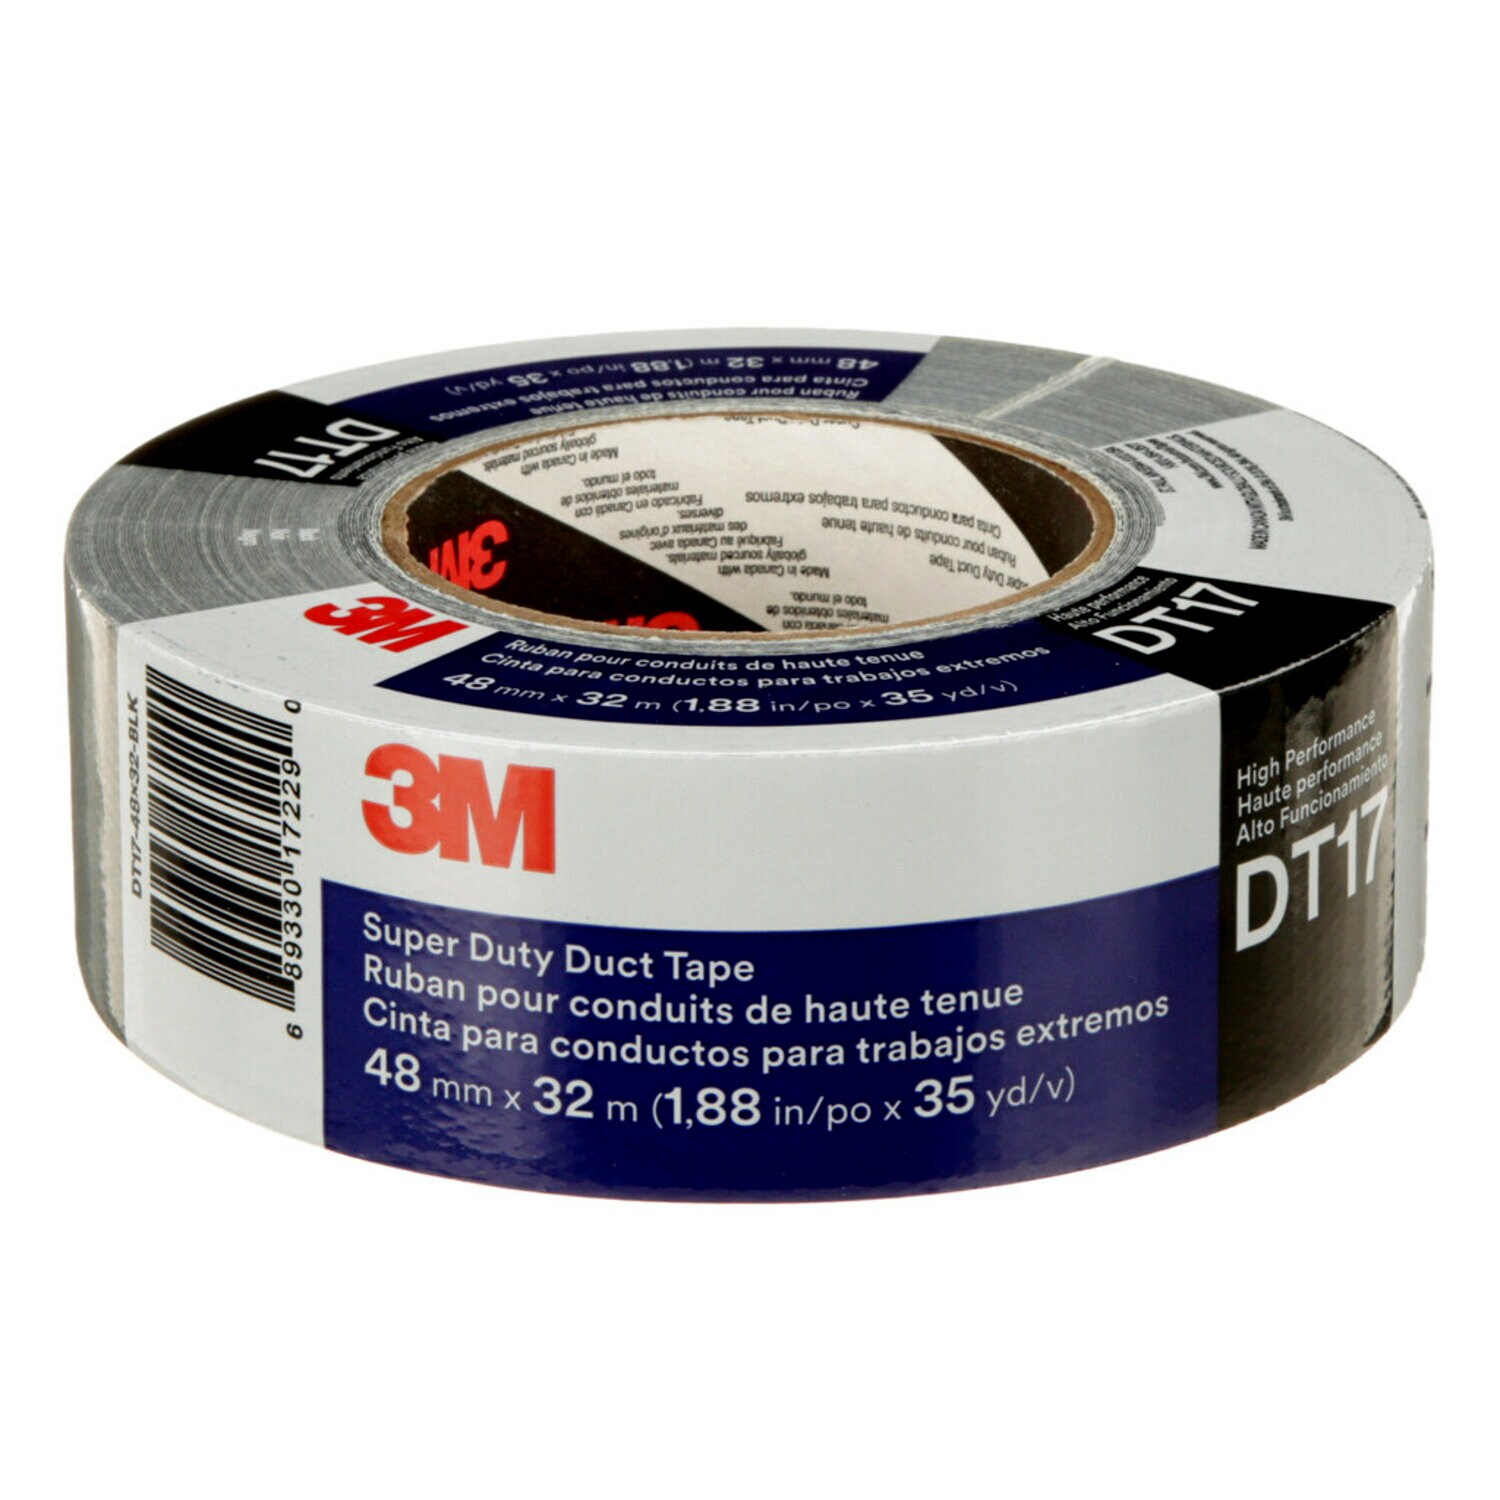 7100158390 - 3M Super Duty Duct Tape DT17, Black, 48 mm x 32 m, 17 mil, 24
Roll/Case, Individually Wrapped Conveniently Packaged